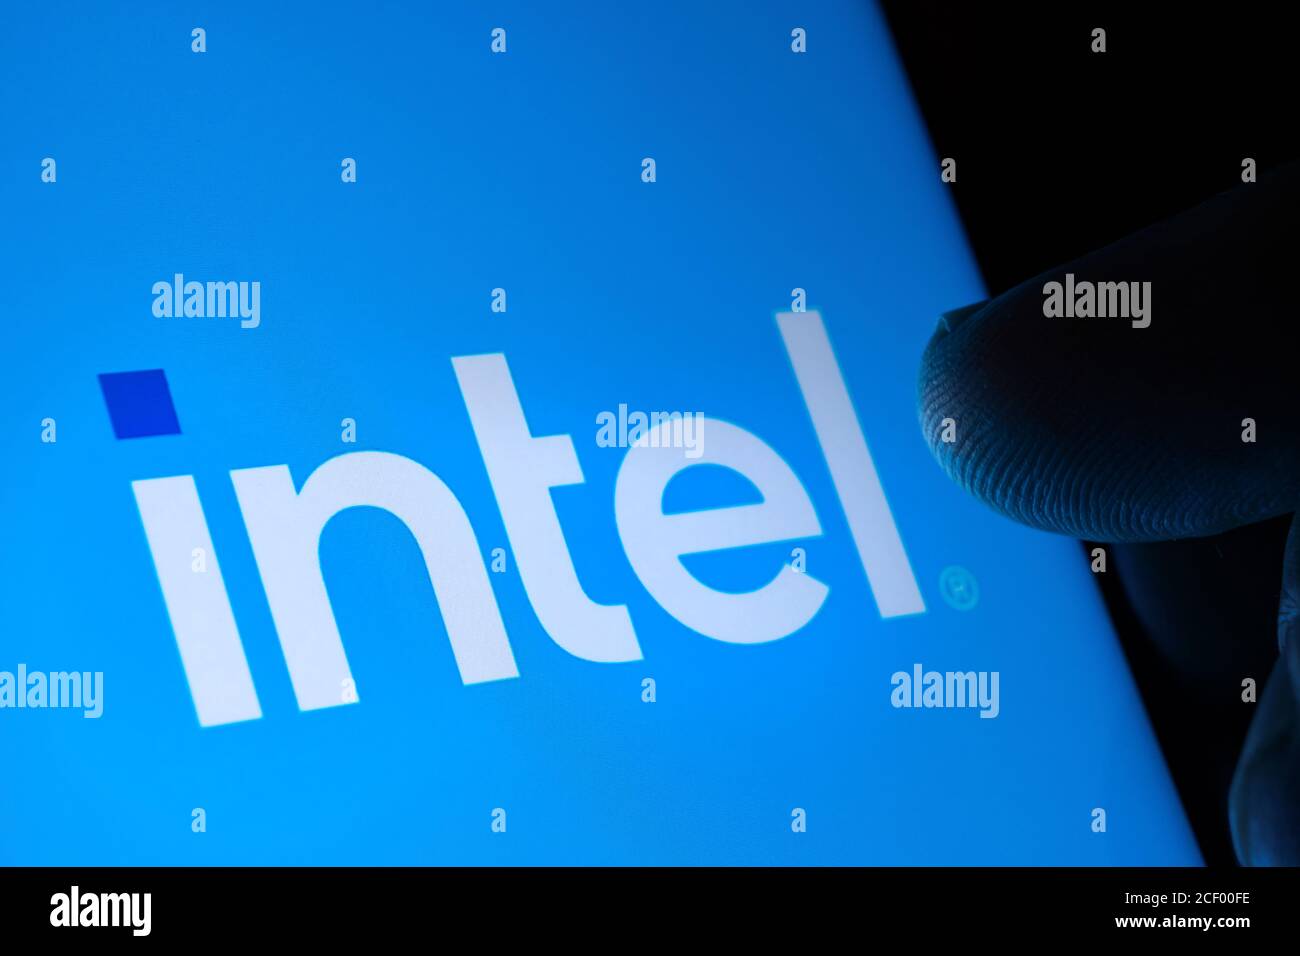 New Intel logo seen on the screen and blurred fingertip touching it in a dark. Intel rebranded its logotype. Selective Stock Photo